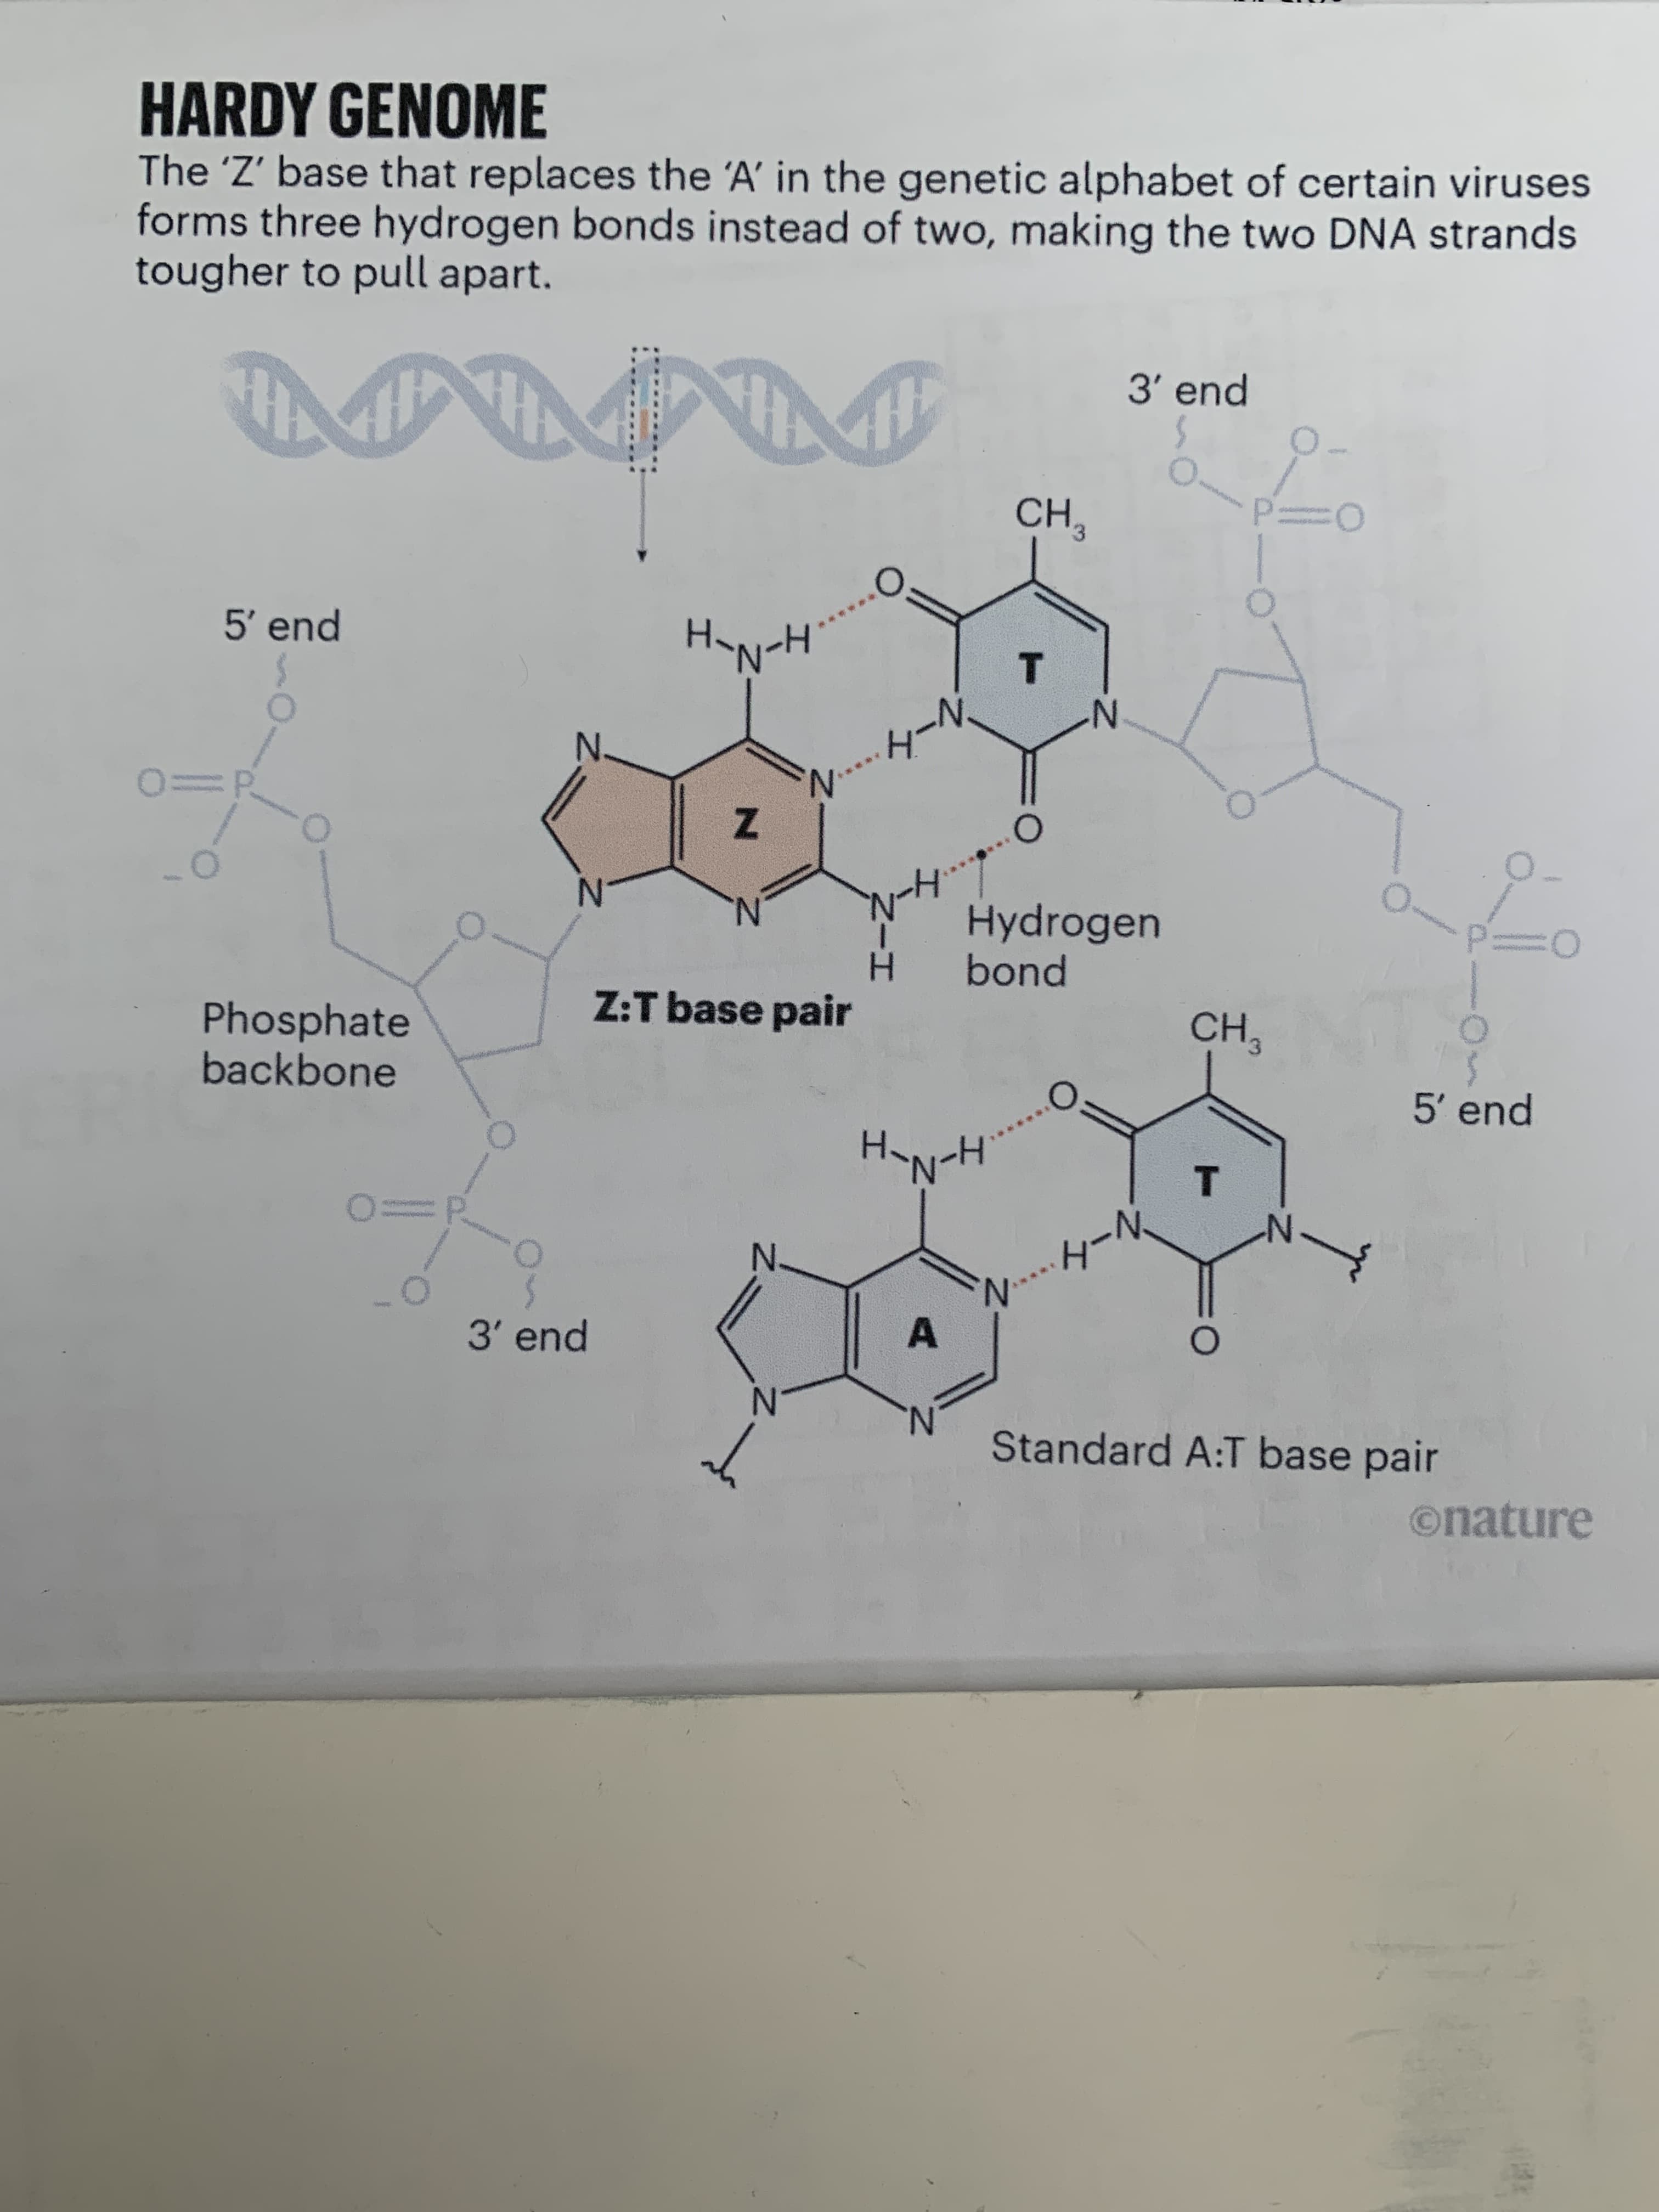 The 'Z' base that replaces the 'A' in the genetic alphabet of certain viruses
forms three hydrogen bonds instead of two, making the two DNA strands
tougher to pull apart.
HARDY GENOME
3' end
CH
5' end
レーダ
N.
Hydrogen
H.
bond
N.
CH3
Z:T base pair
5' end
Phosphate
backbone
T.
Wード…
A.
3' end
N.
Standard A:T base pair
onature
